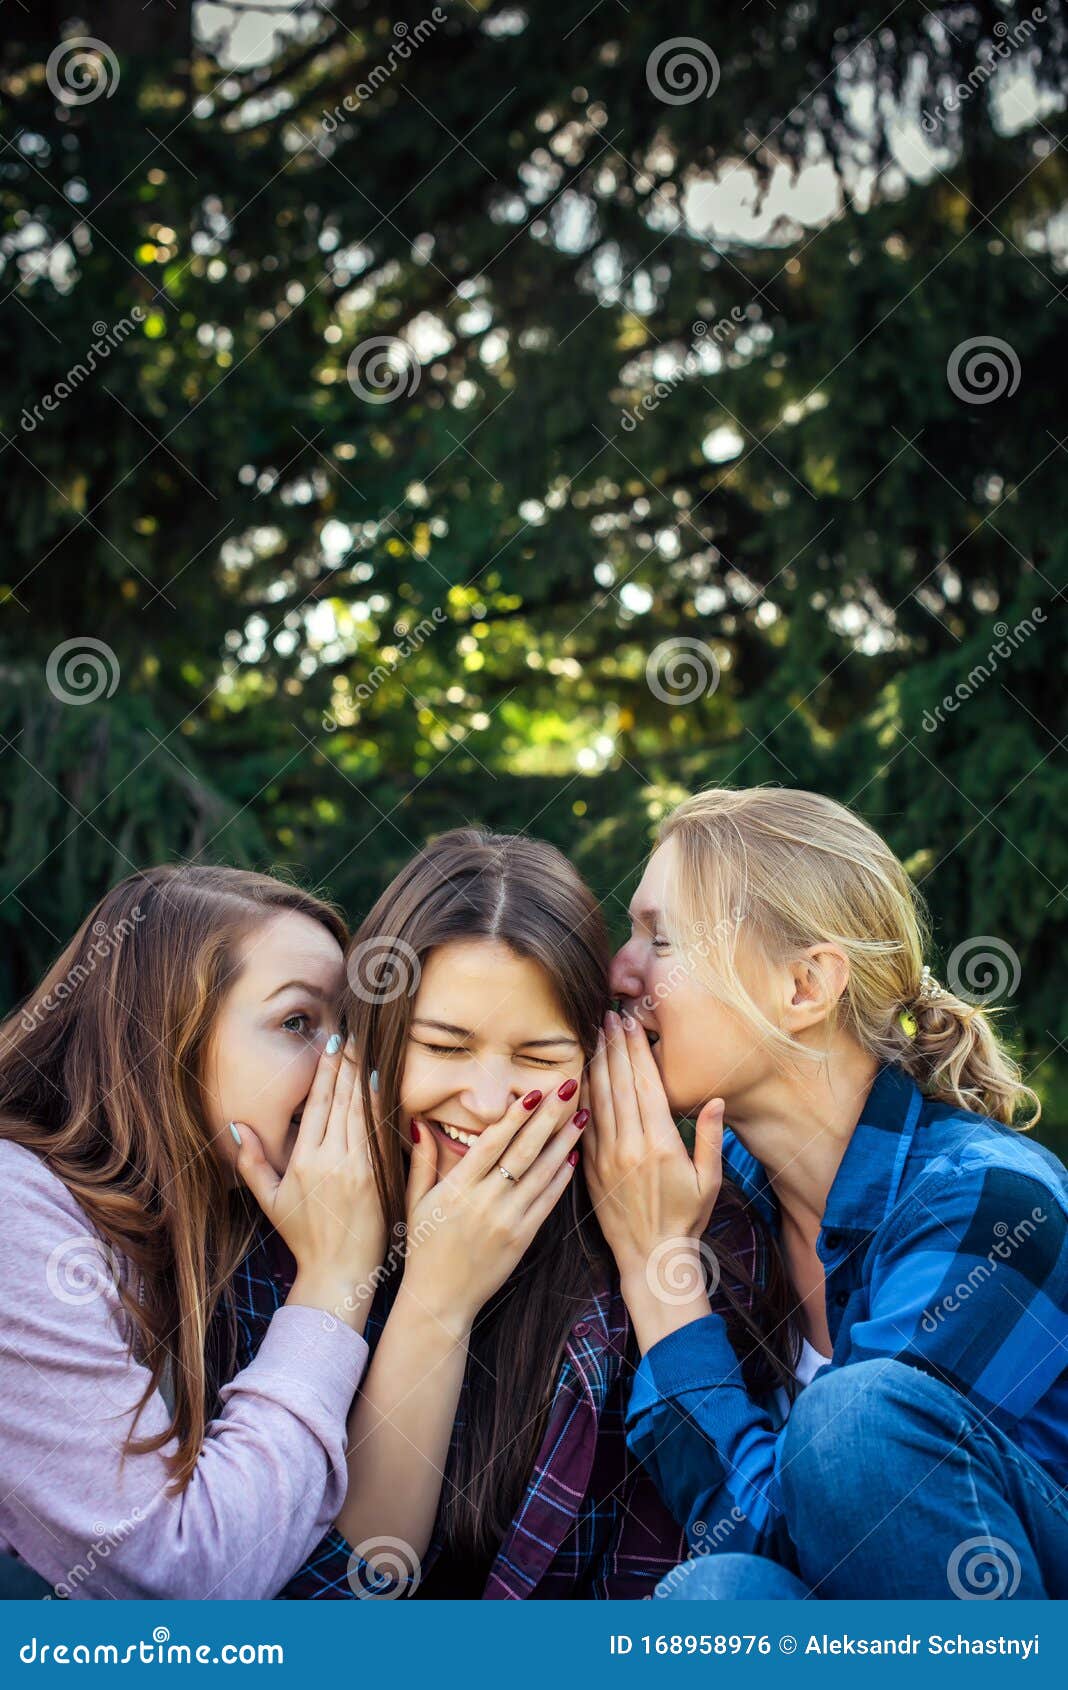 Three Cheerful Girls Whisper And Gossip Against Green Foliage In The Park Women Joke And Laugh